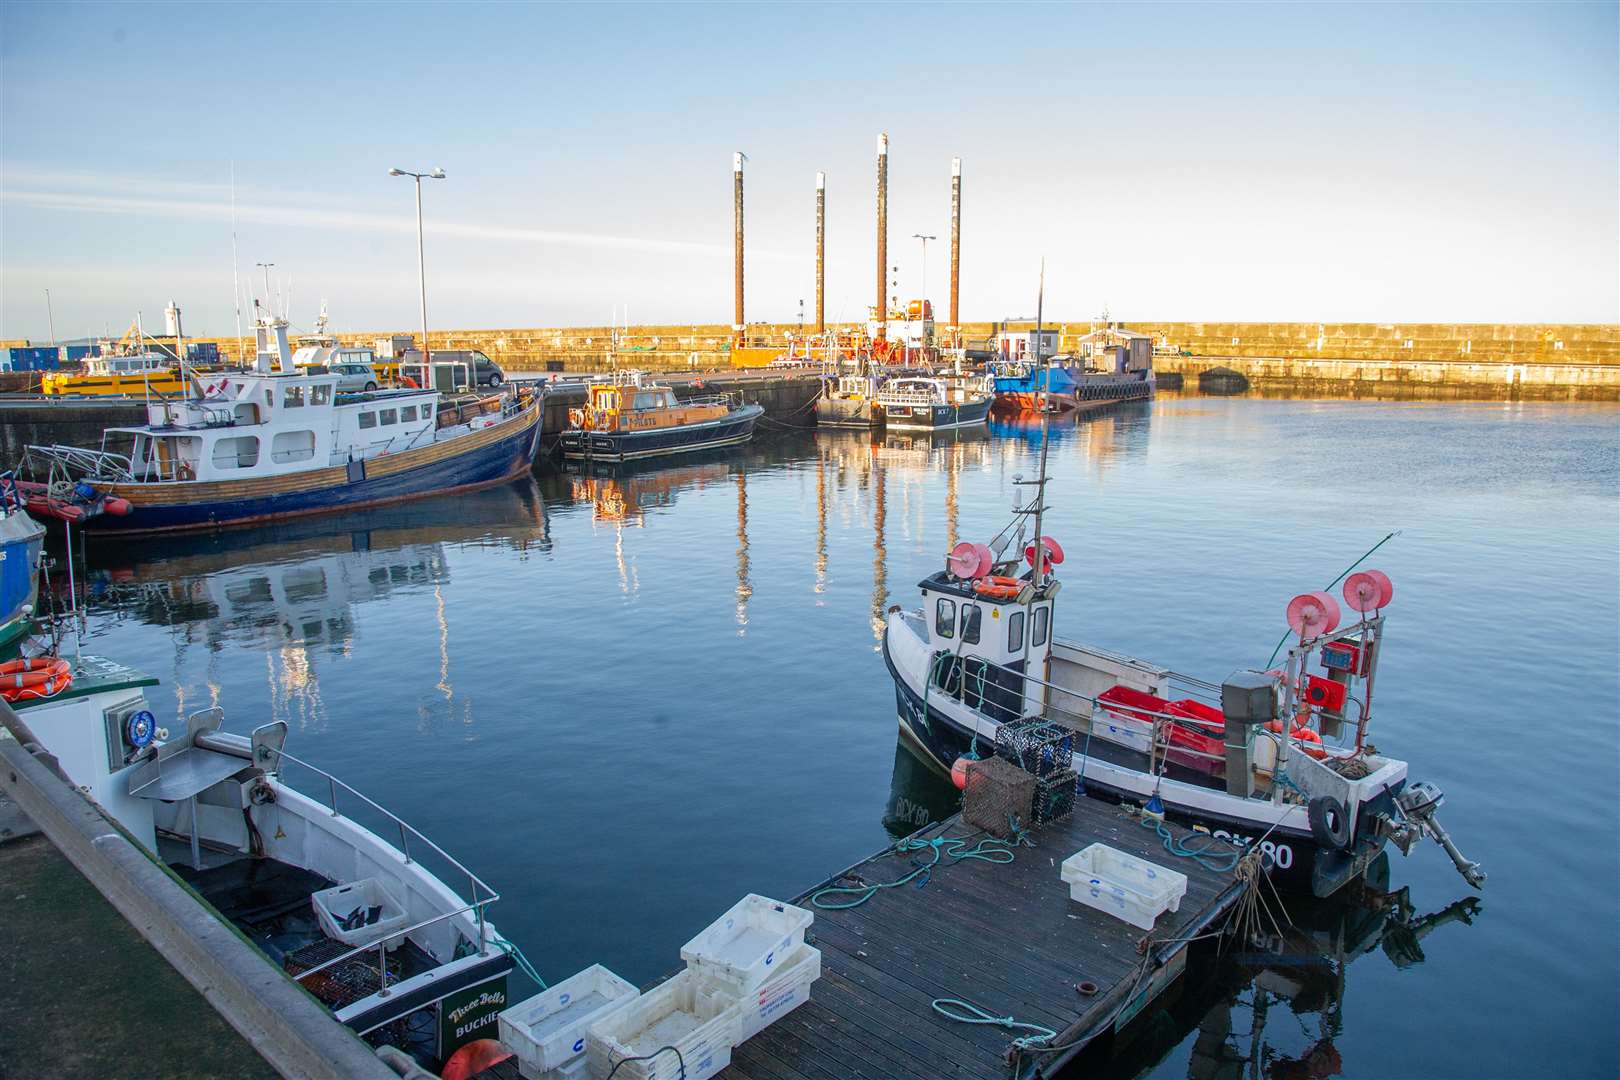 There were no fish landings at Buckie Harbour last week. Picture: Daniel Forsyth